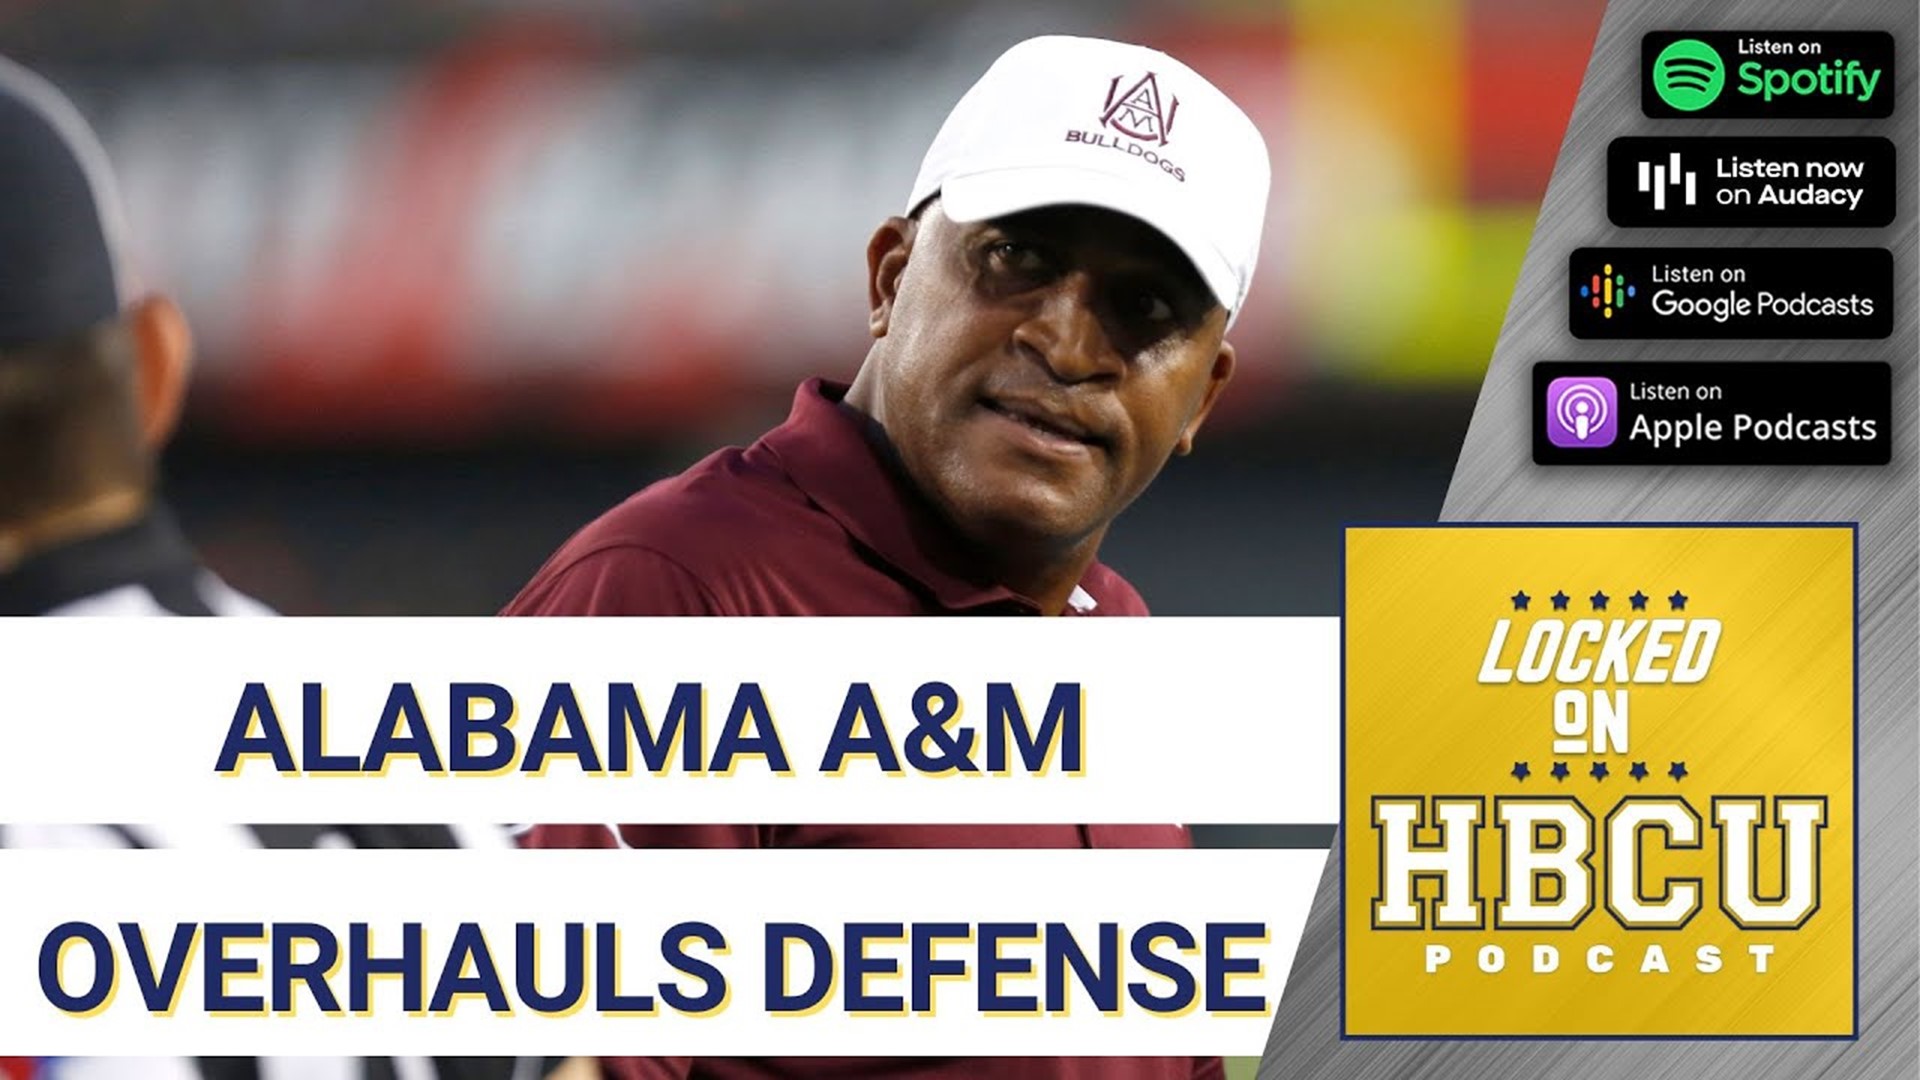 Alabama A&M is overhauling the whole defense after the departure of Aqeel Glass, and we look into the MEAC players to make Jim Nagy’s Senior Bowl watchlist.